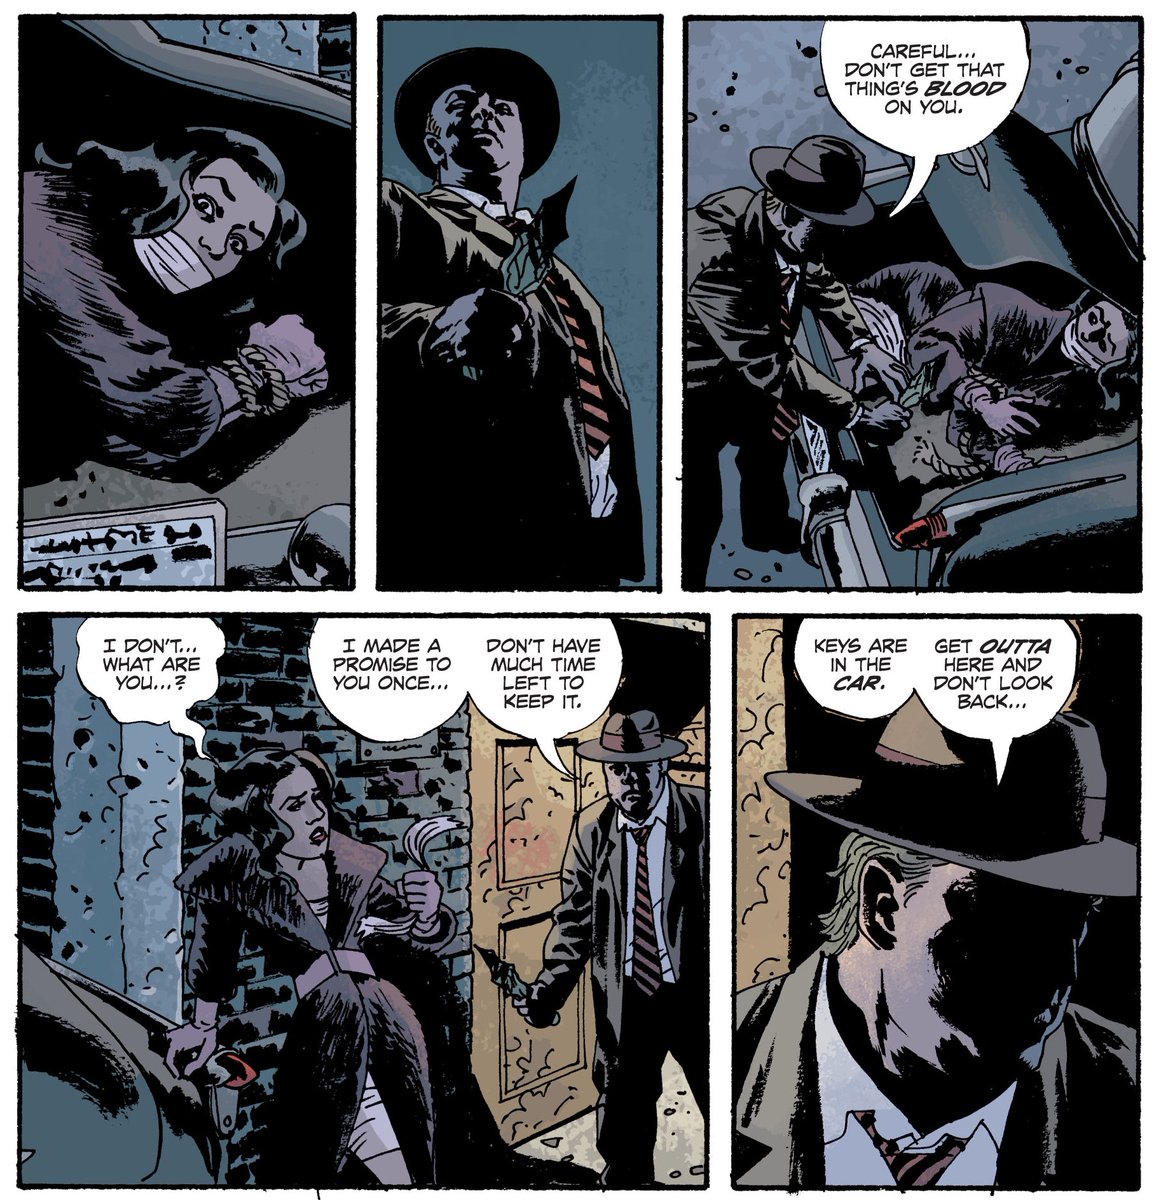 'Get outta here and don't look back...' - Fatale #5